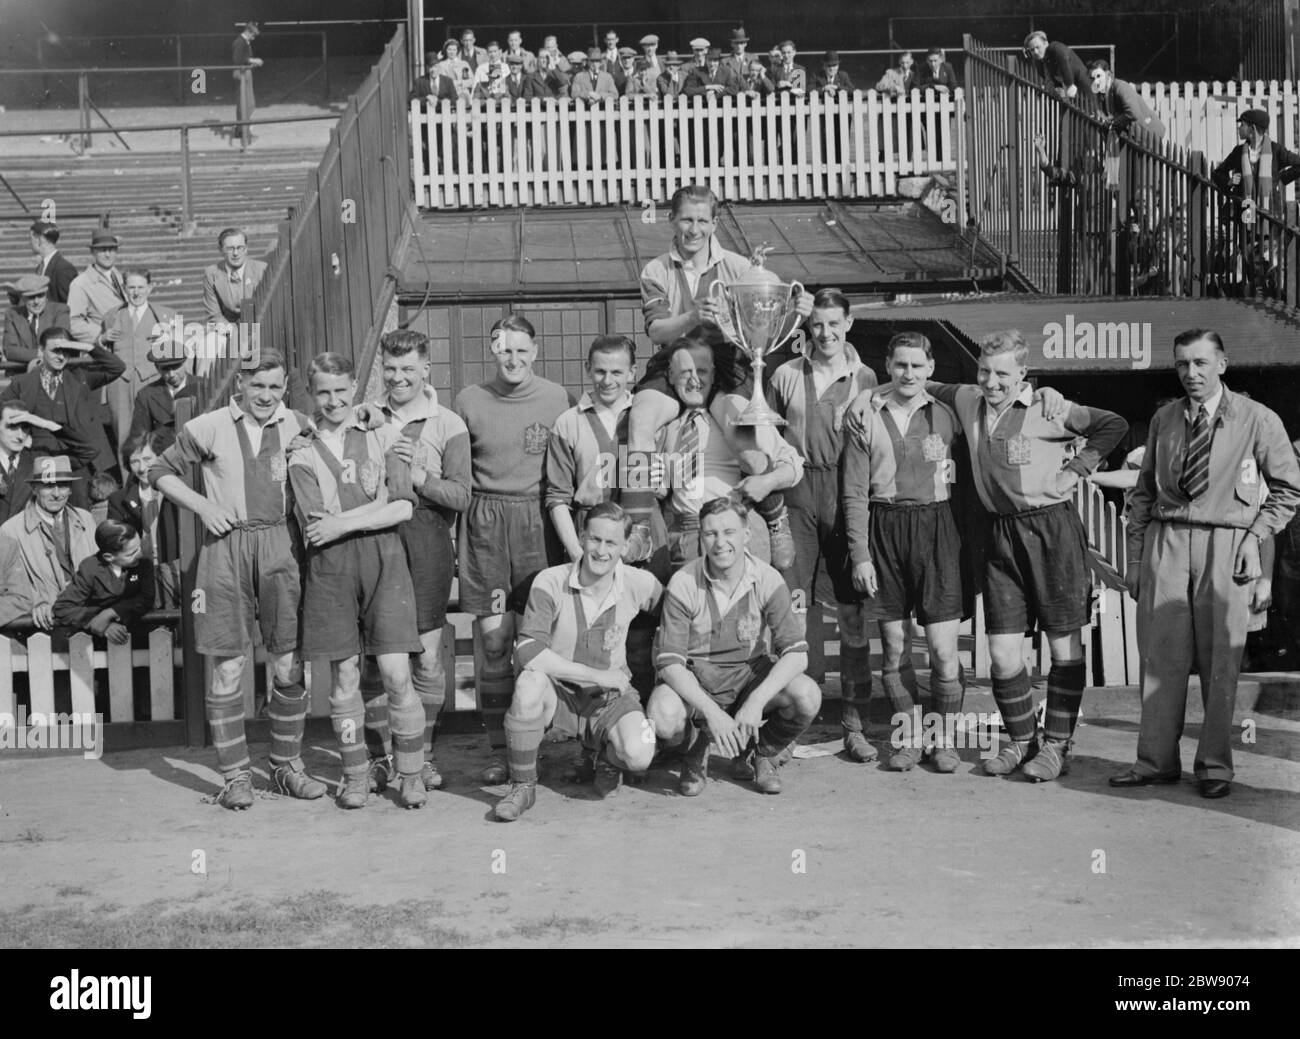 The Dulwich Hamlet Group Football Team : H S Robbins , S Lewis , A J Hugo , H H C Hill , W W Parr , C Murray ( with cup ) , C Powell , B D Beglan , D S Waymouth , ( sitting ) H J Ball , R S Anderson . 13 May 1937 Stock Photo